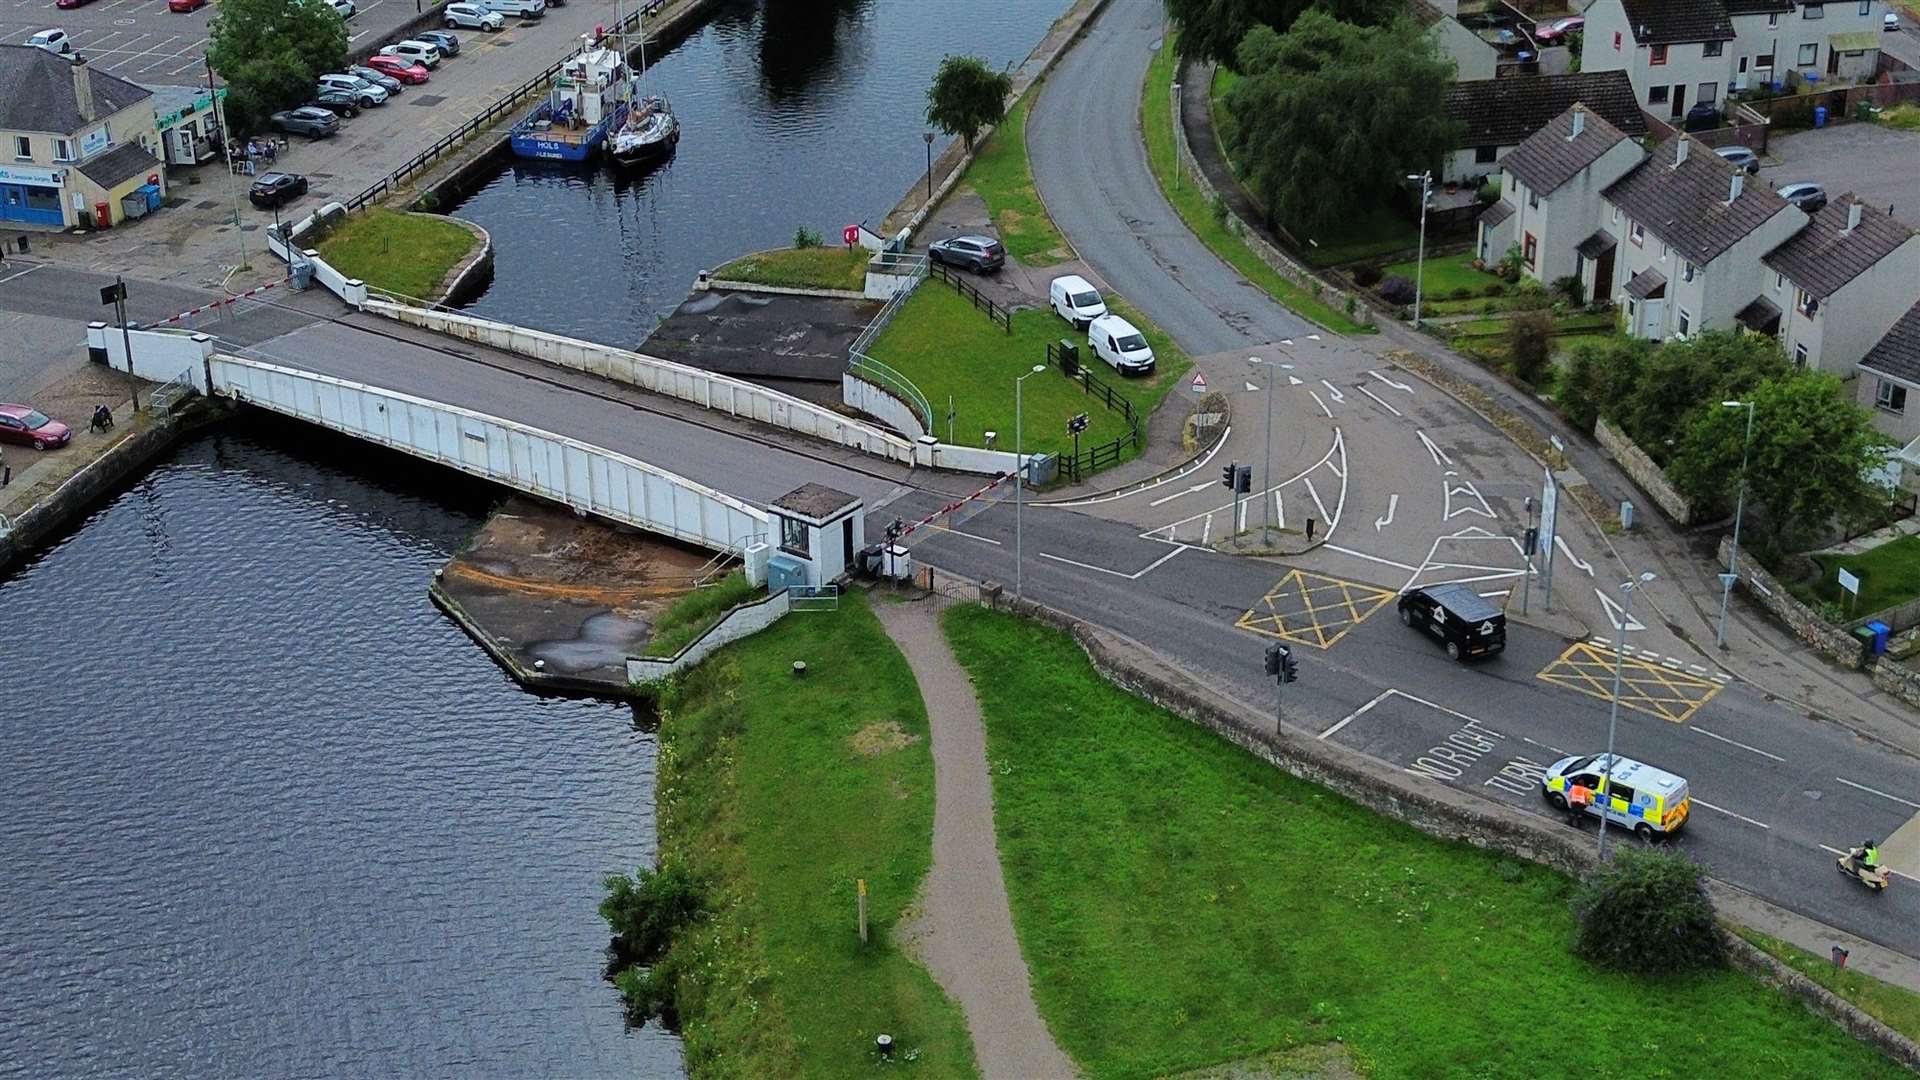 The jammed Muirtown Bridge from the air.